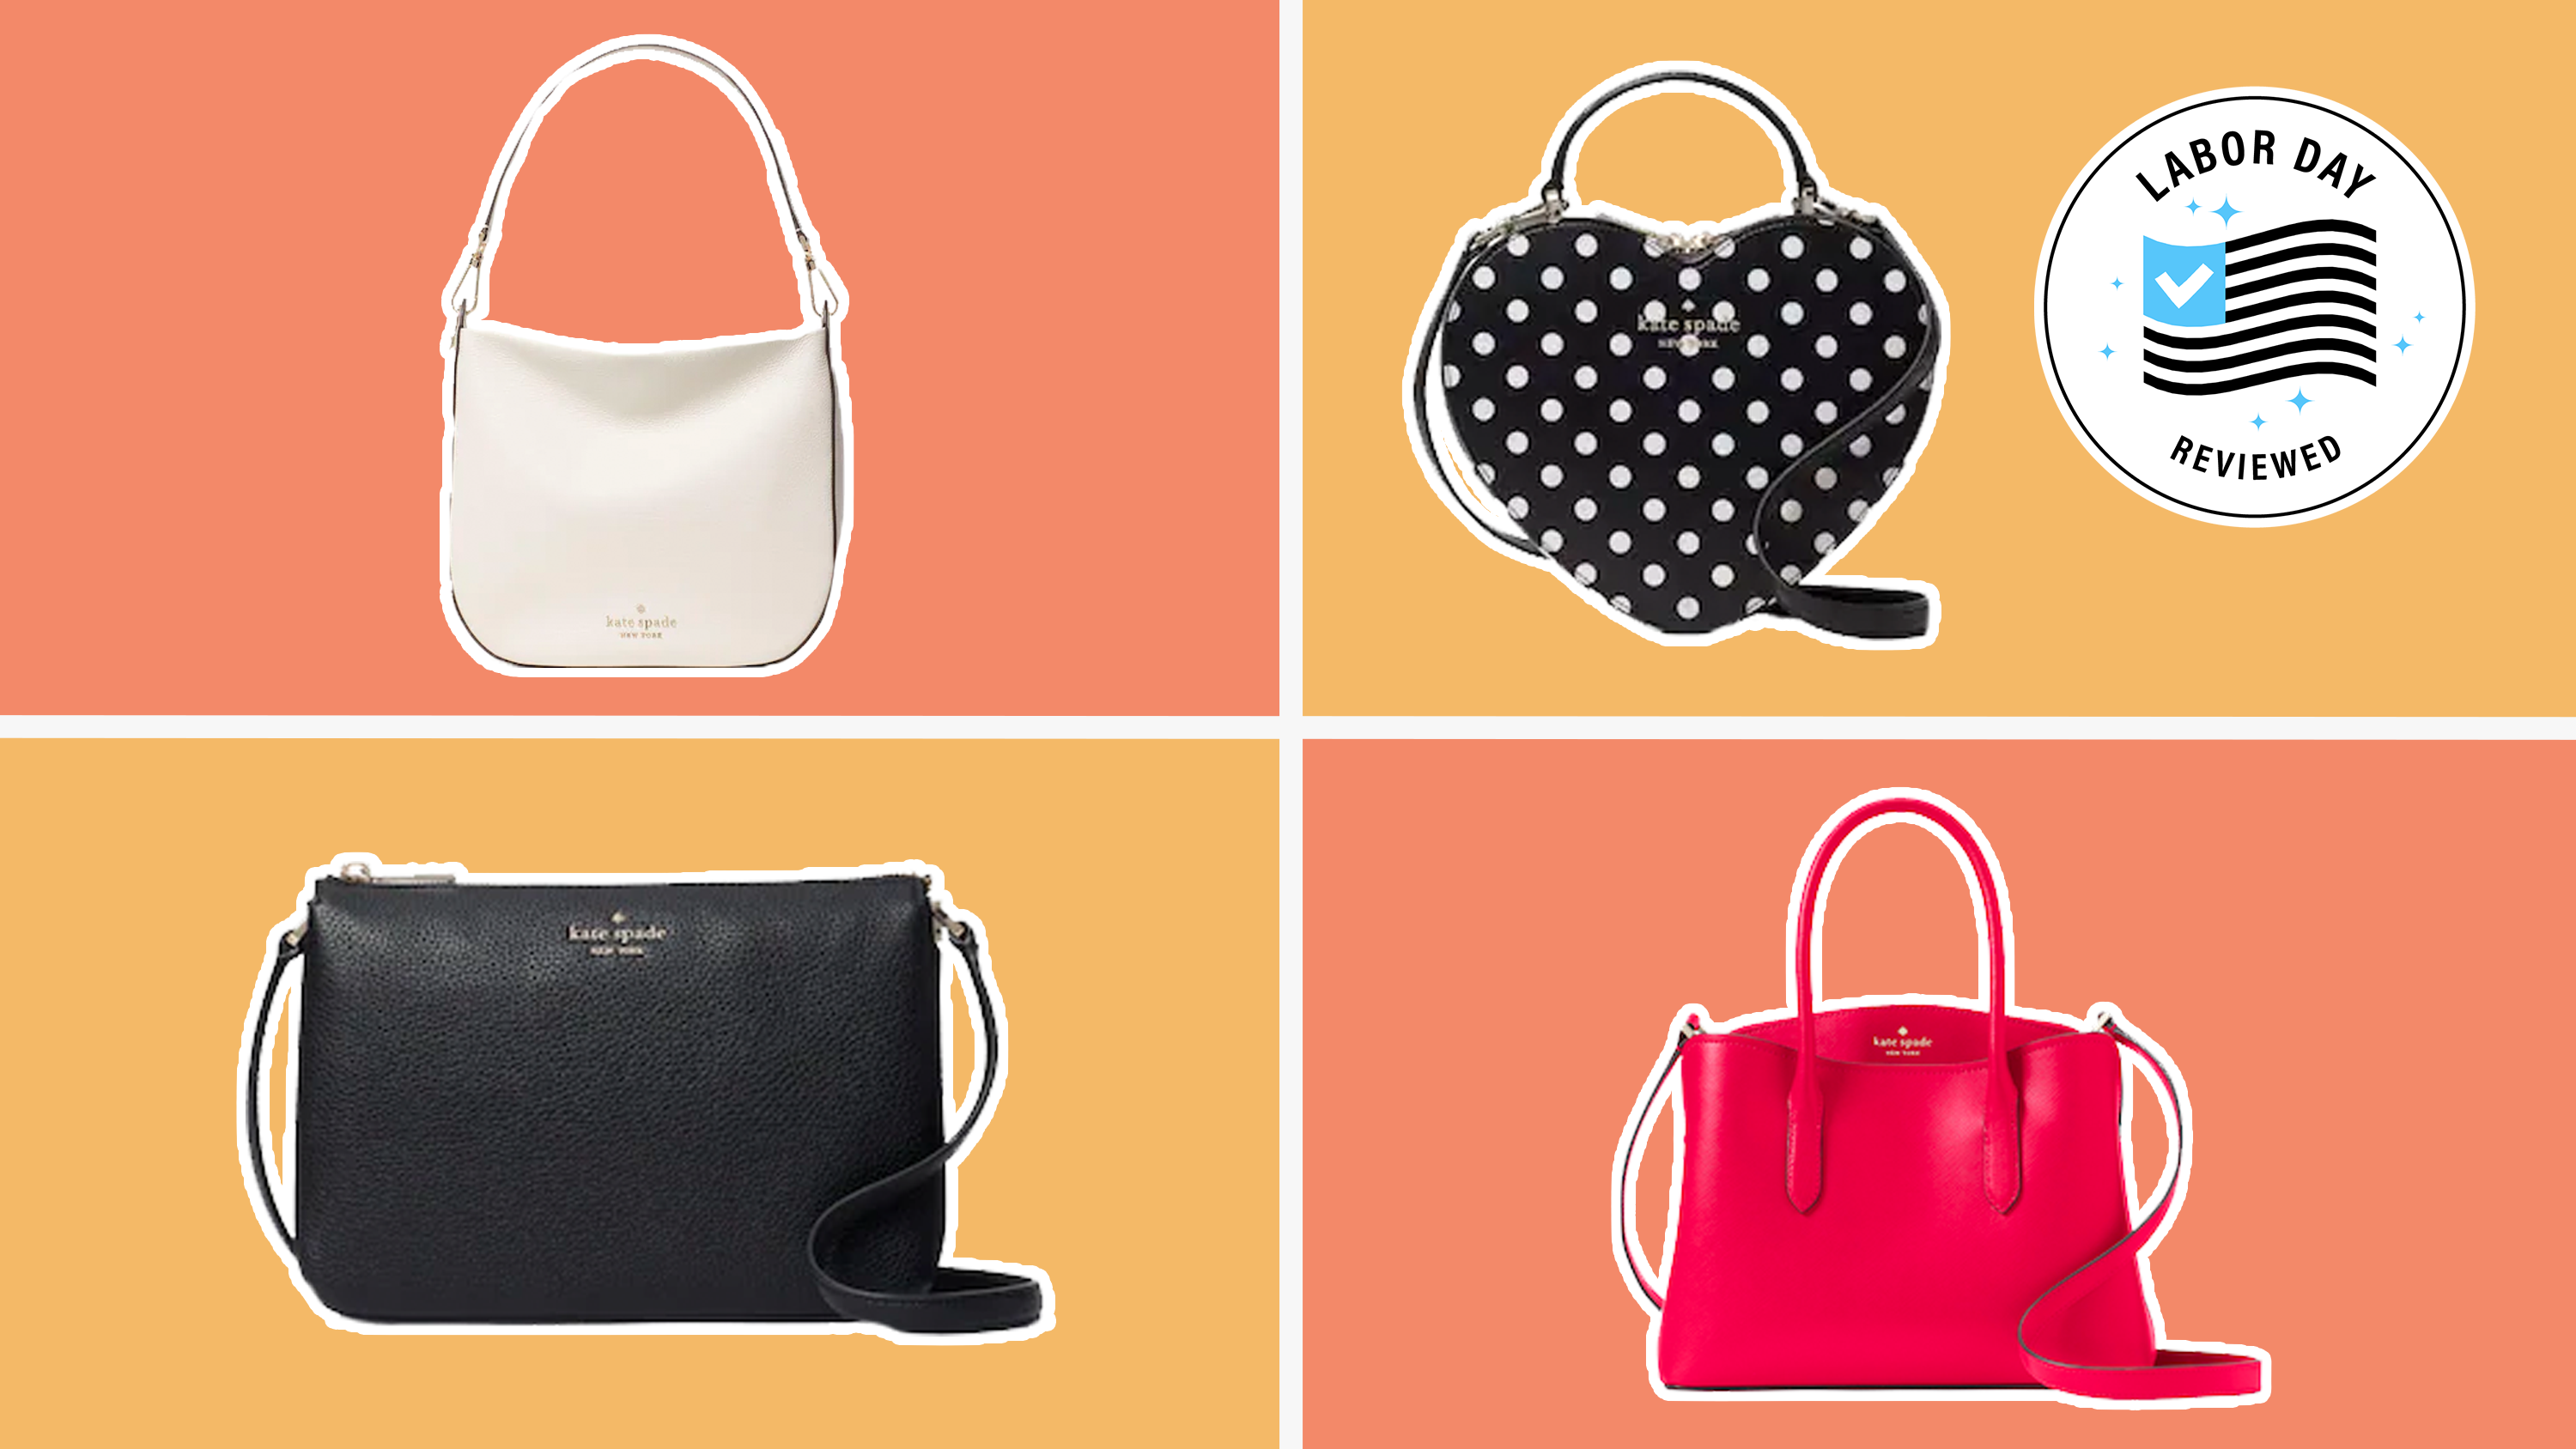 Kate Spade Surprise sale: Save big on purses ahead of Labor Day